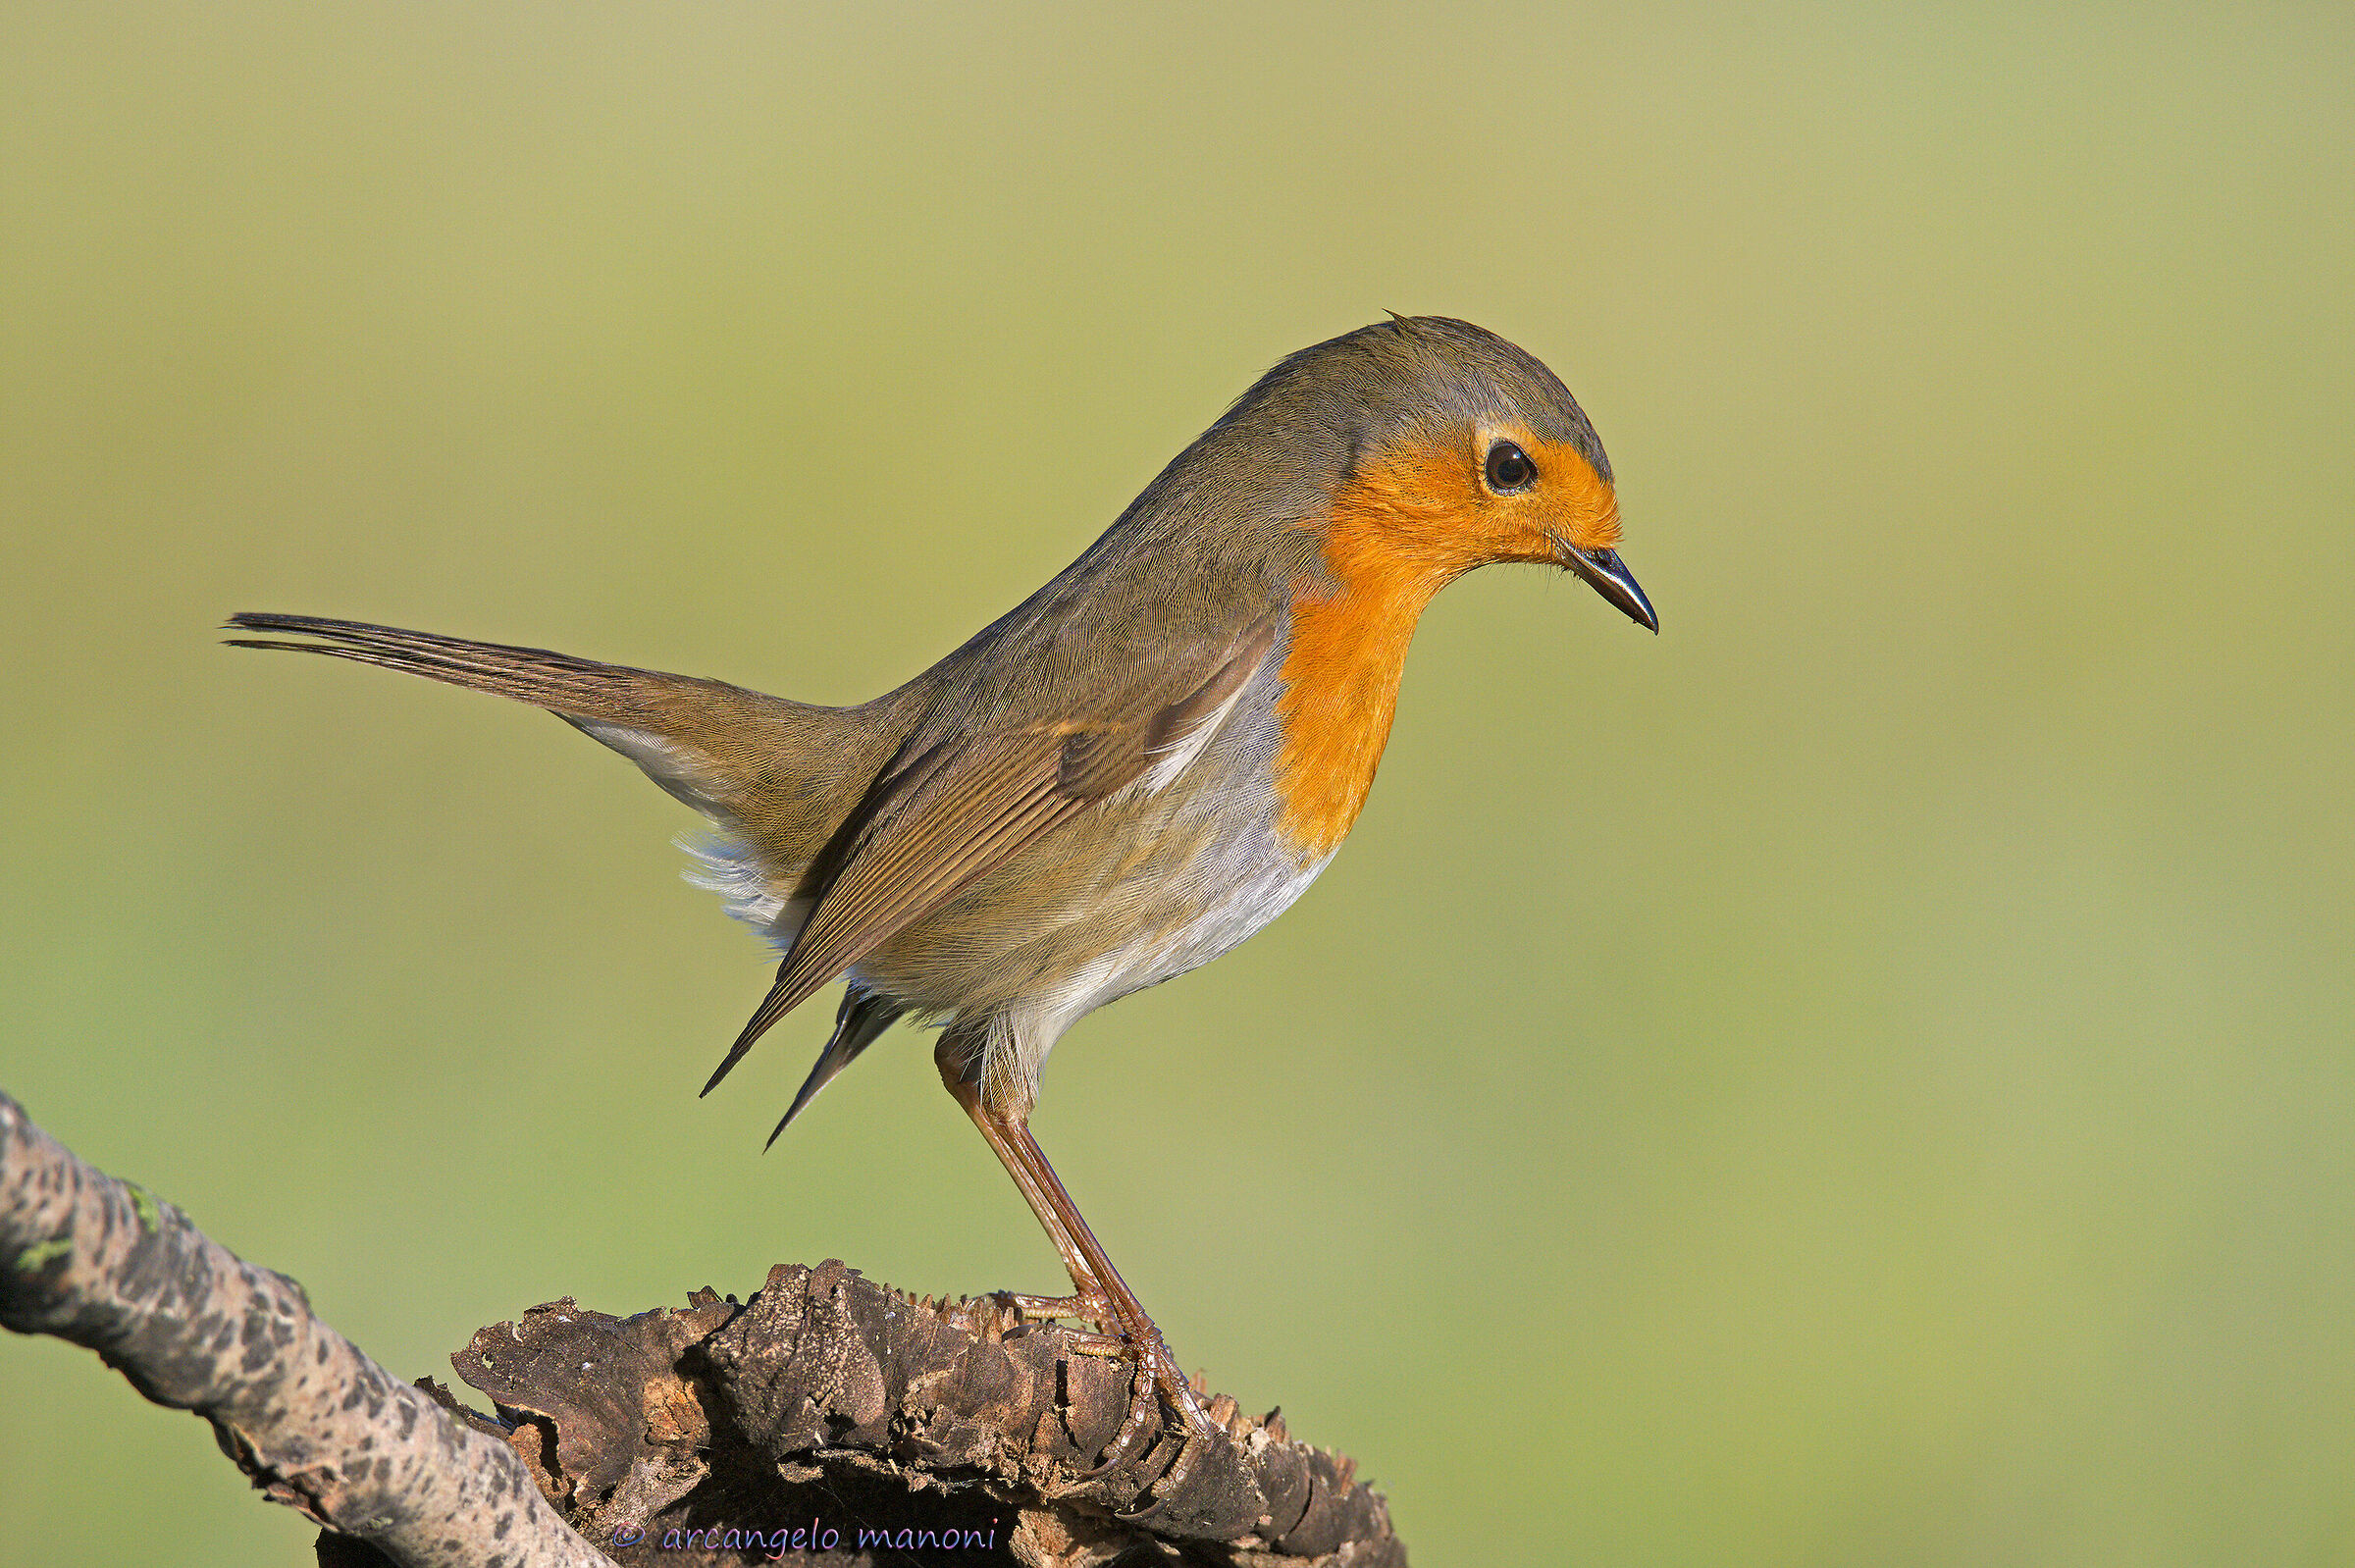 A robin on the attentive...